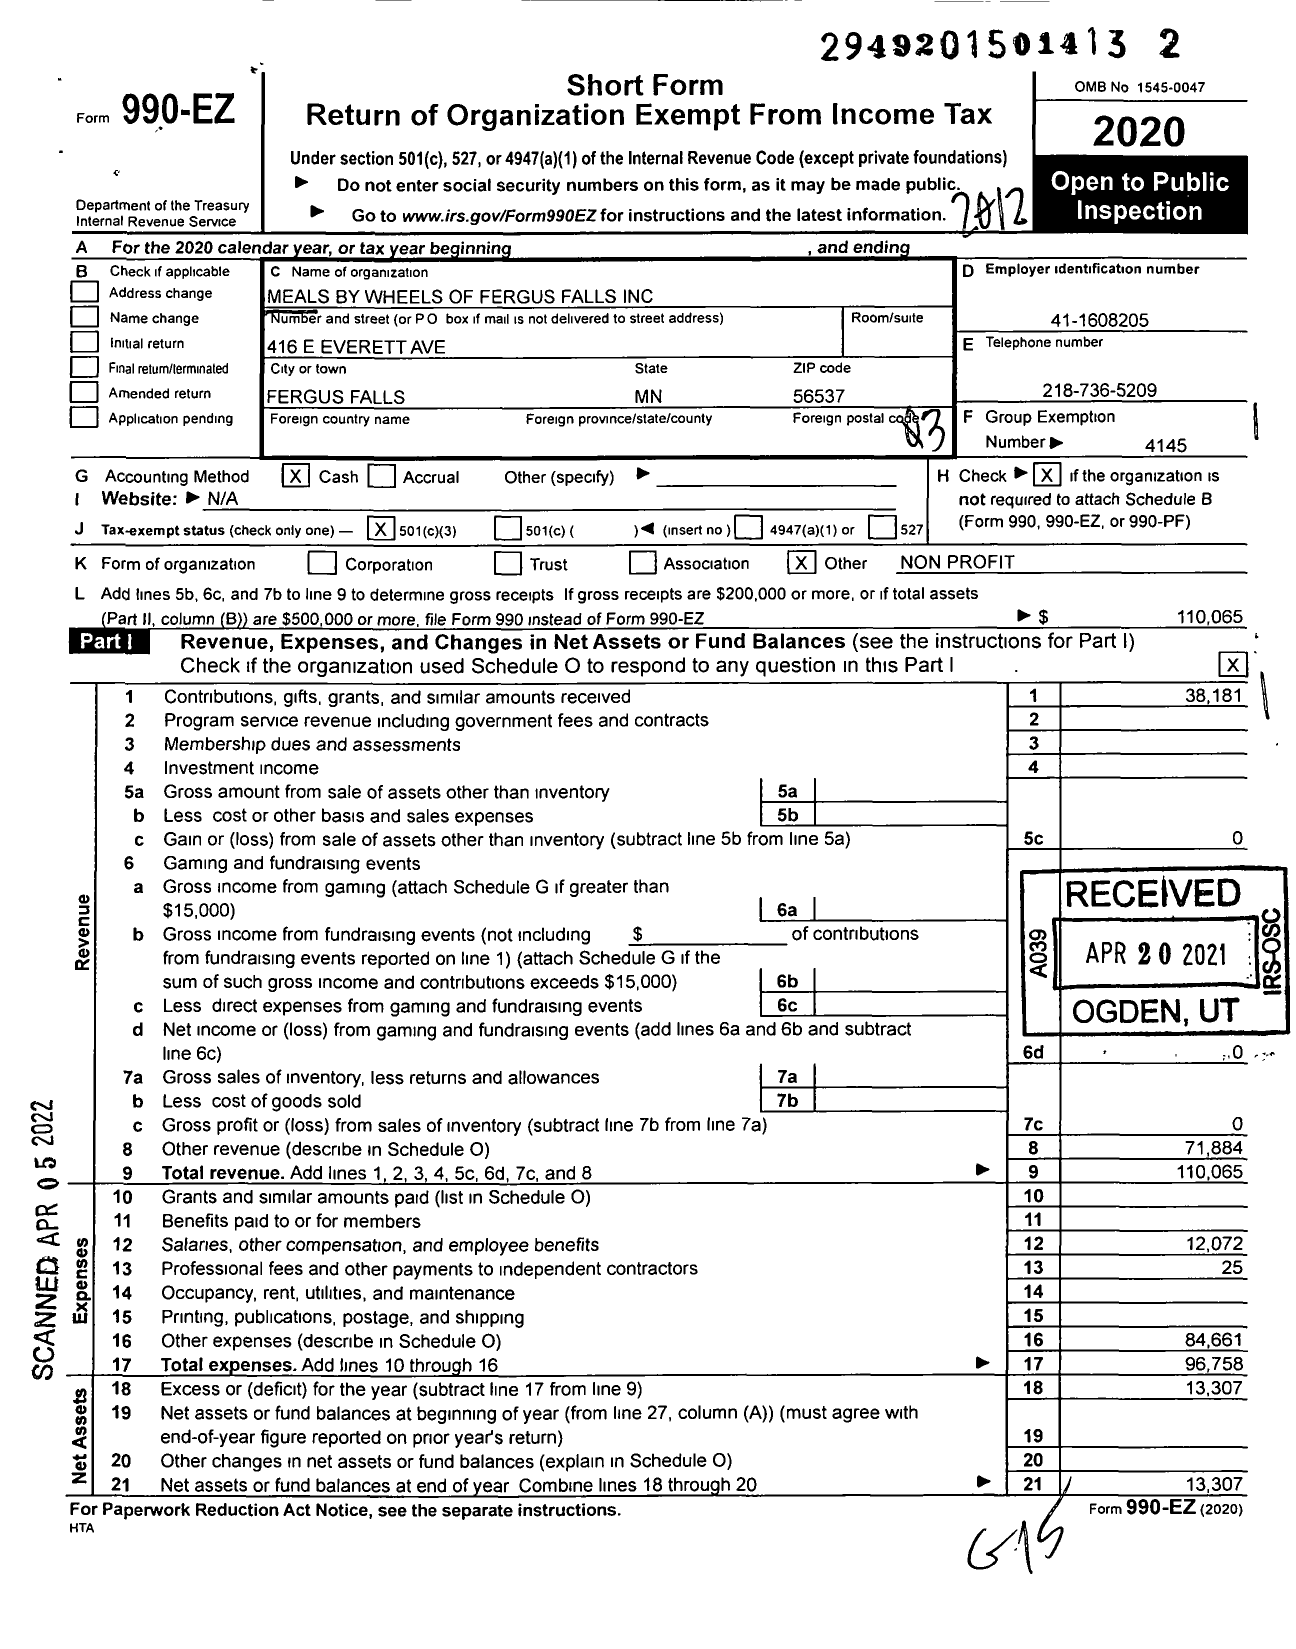 Image of first page of 2020 Form 990EZ for Meals By Wheels of Fergus Falls